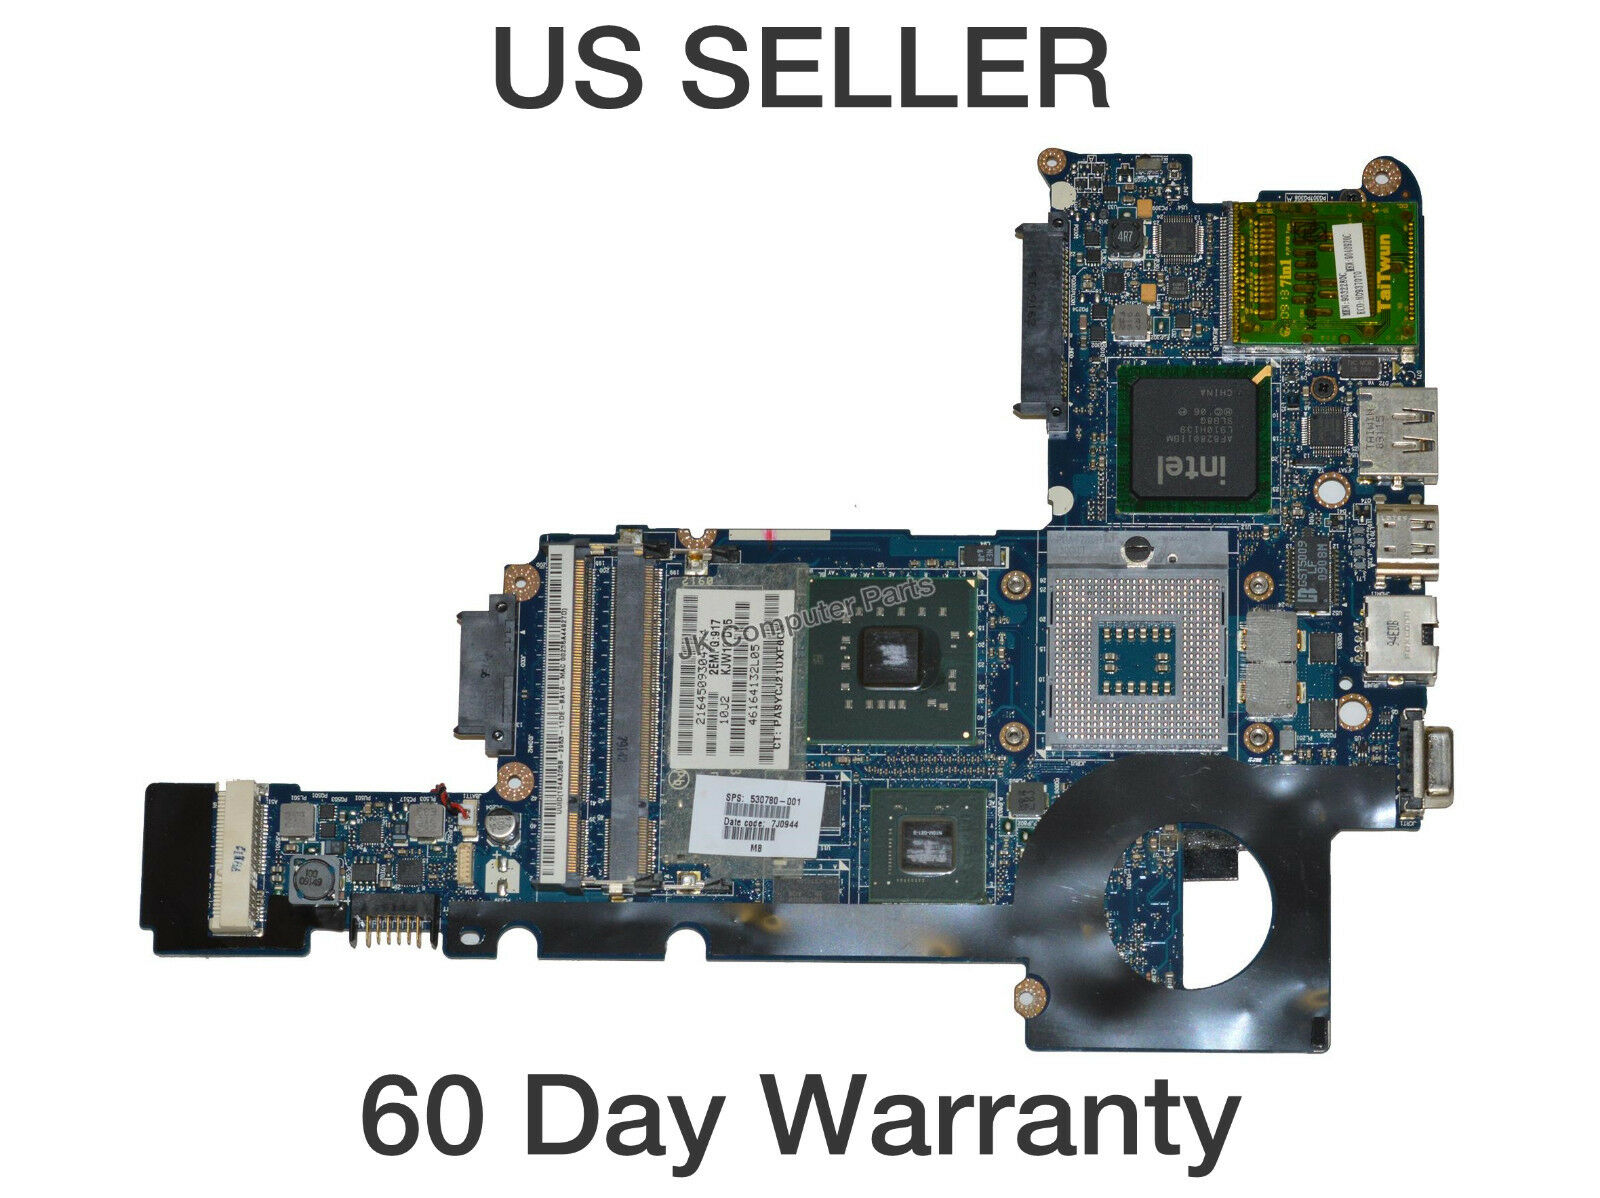 HP Pavilion DV3-2101 DV3-2102 DV3-2103 DV3-2104 Laptop Motherboard 530780-001 This motherboard is tested an